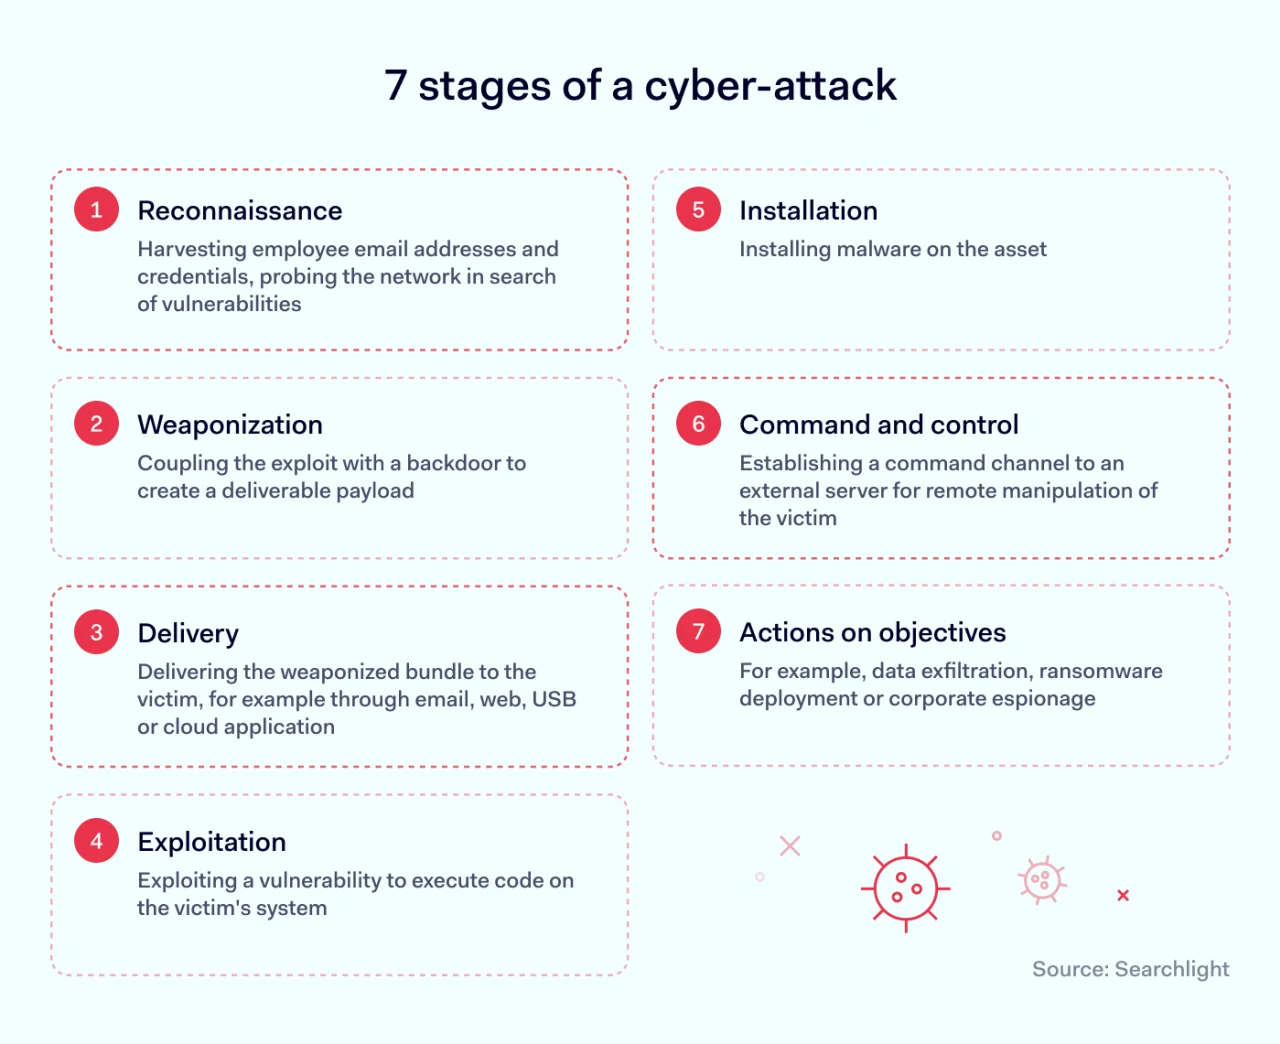 7 stages of cyber-attacks